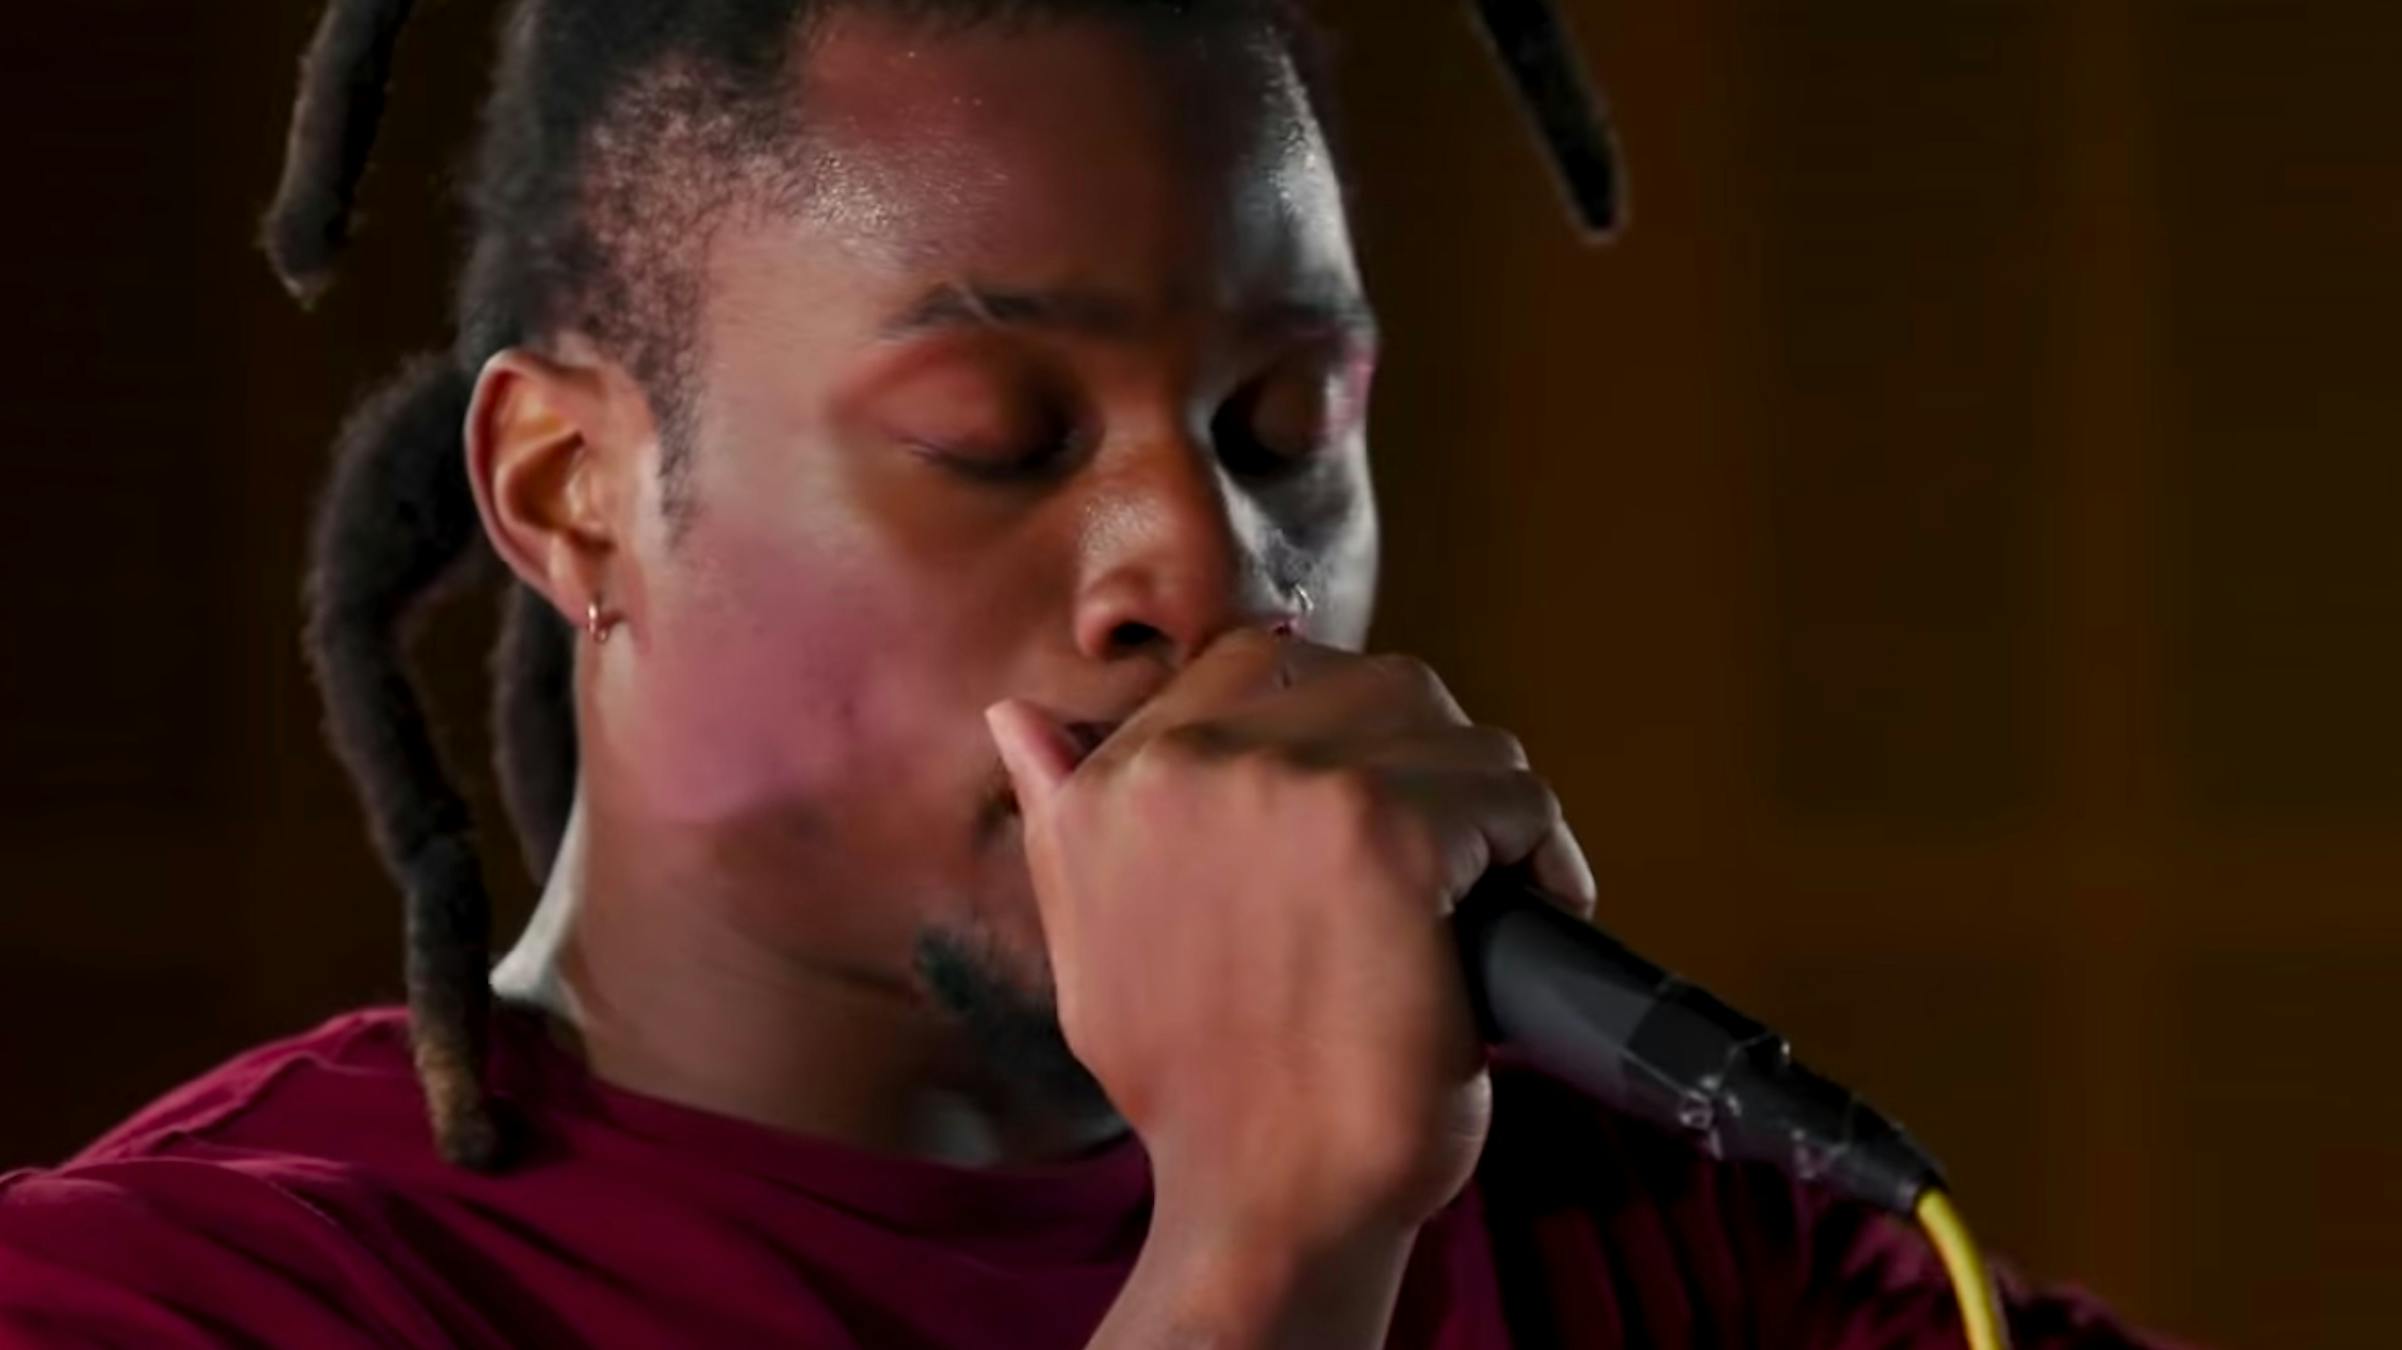 Here's Rapper Denzel Curry's Version Of Rage Against The Machine's Bulls On Parade